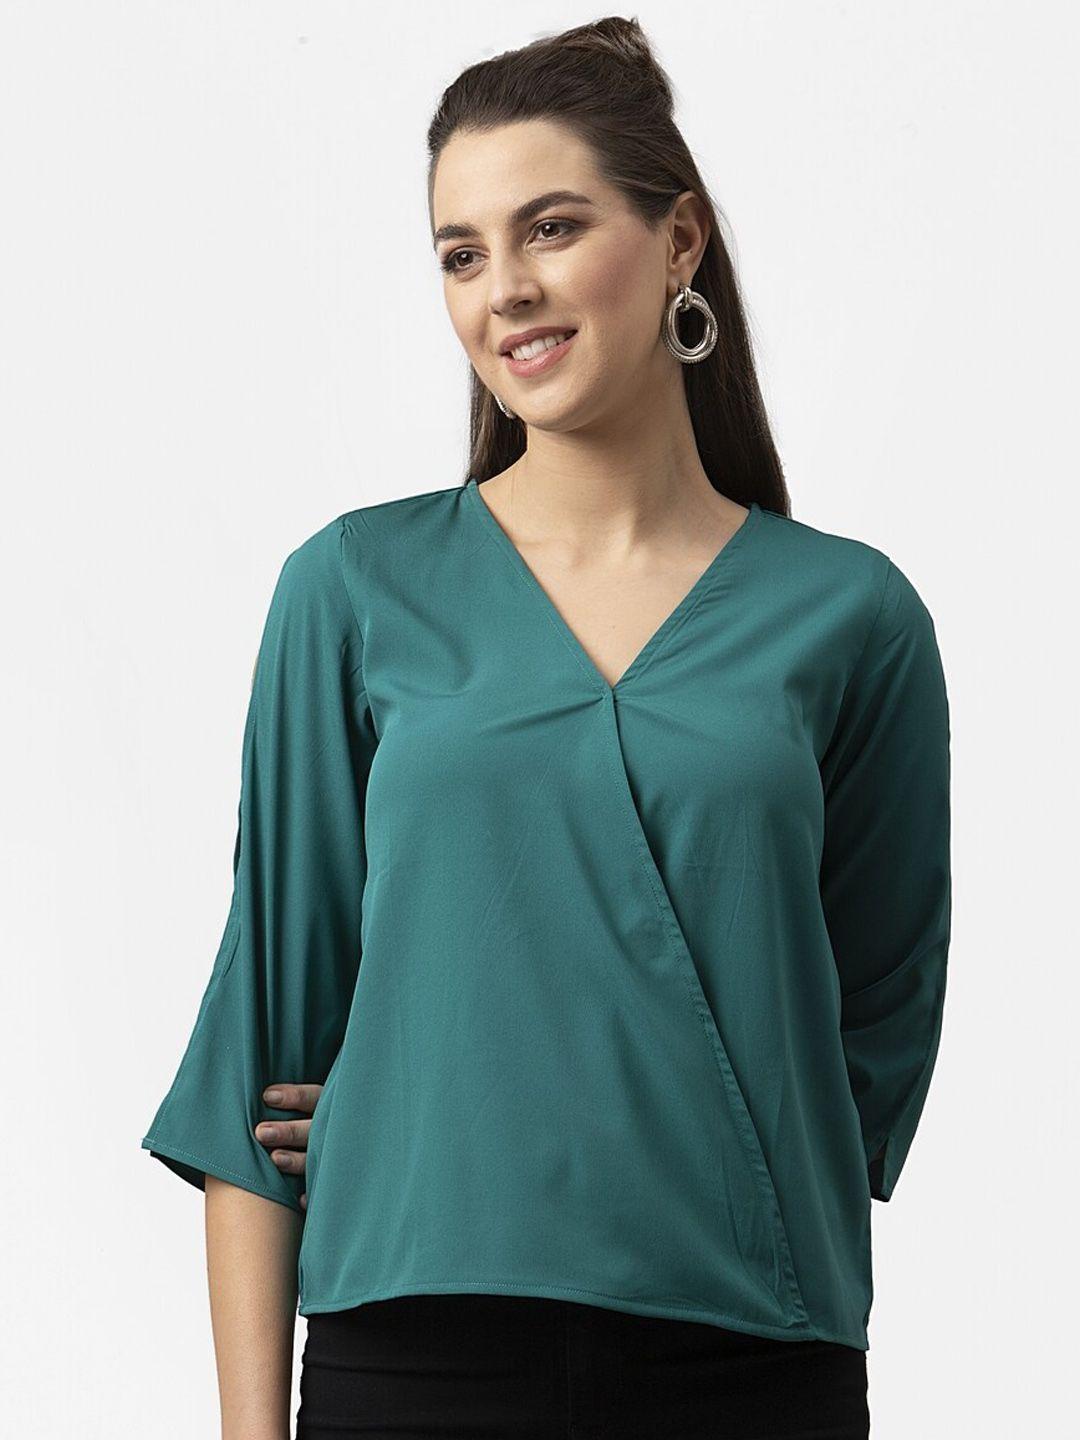 style quotient teal green wrap top